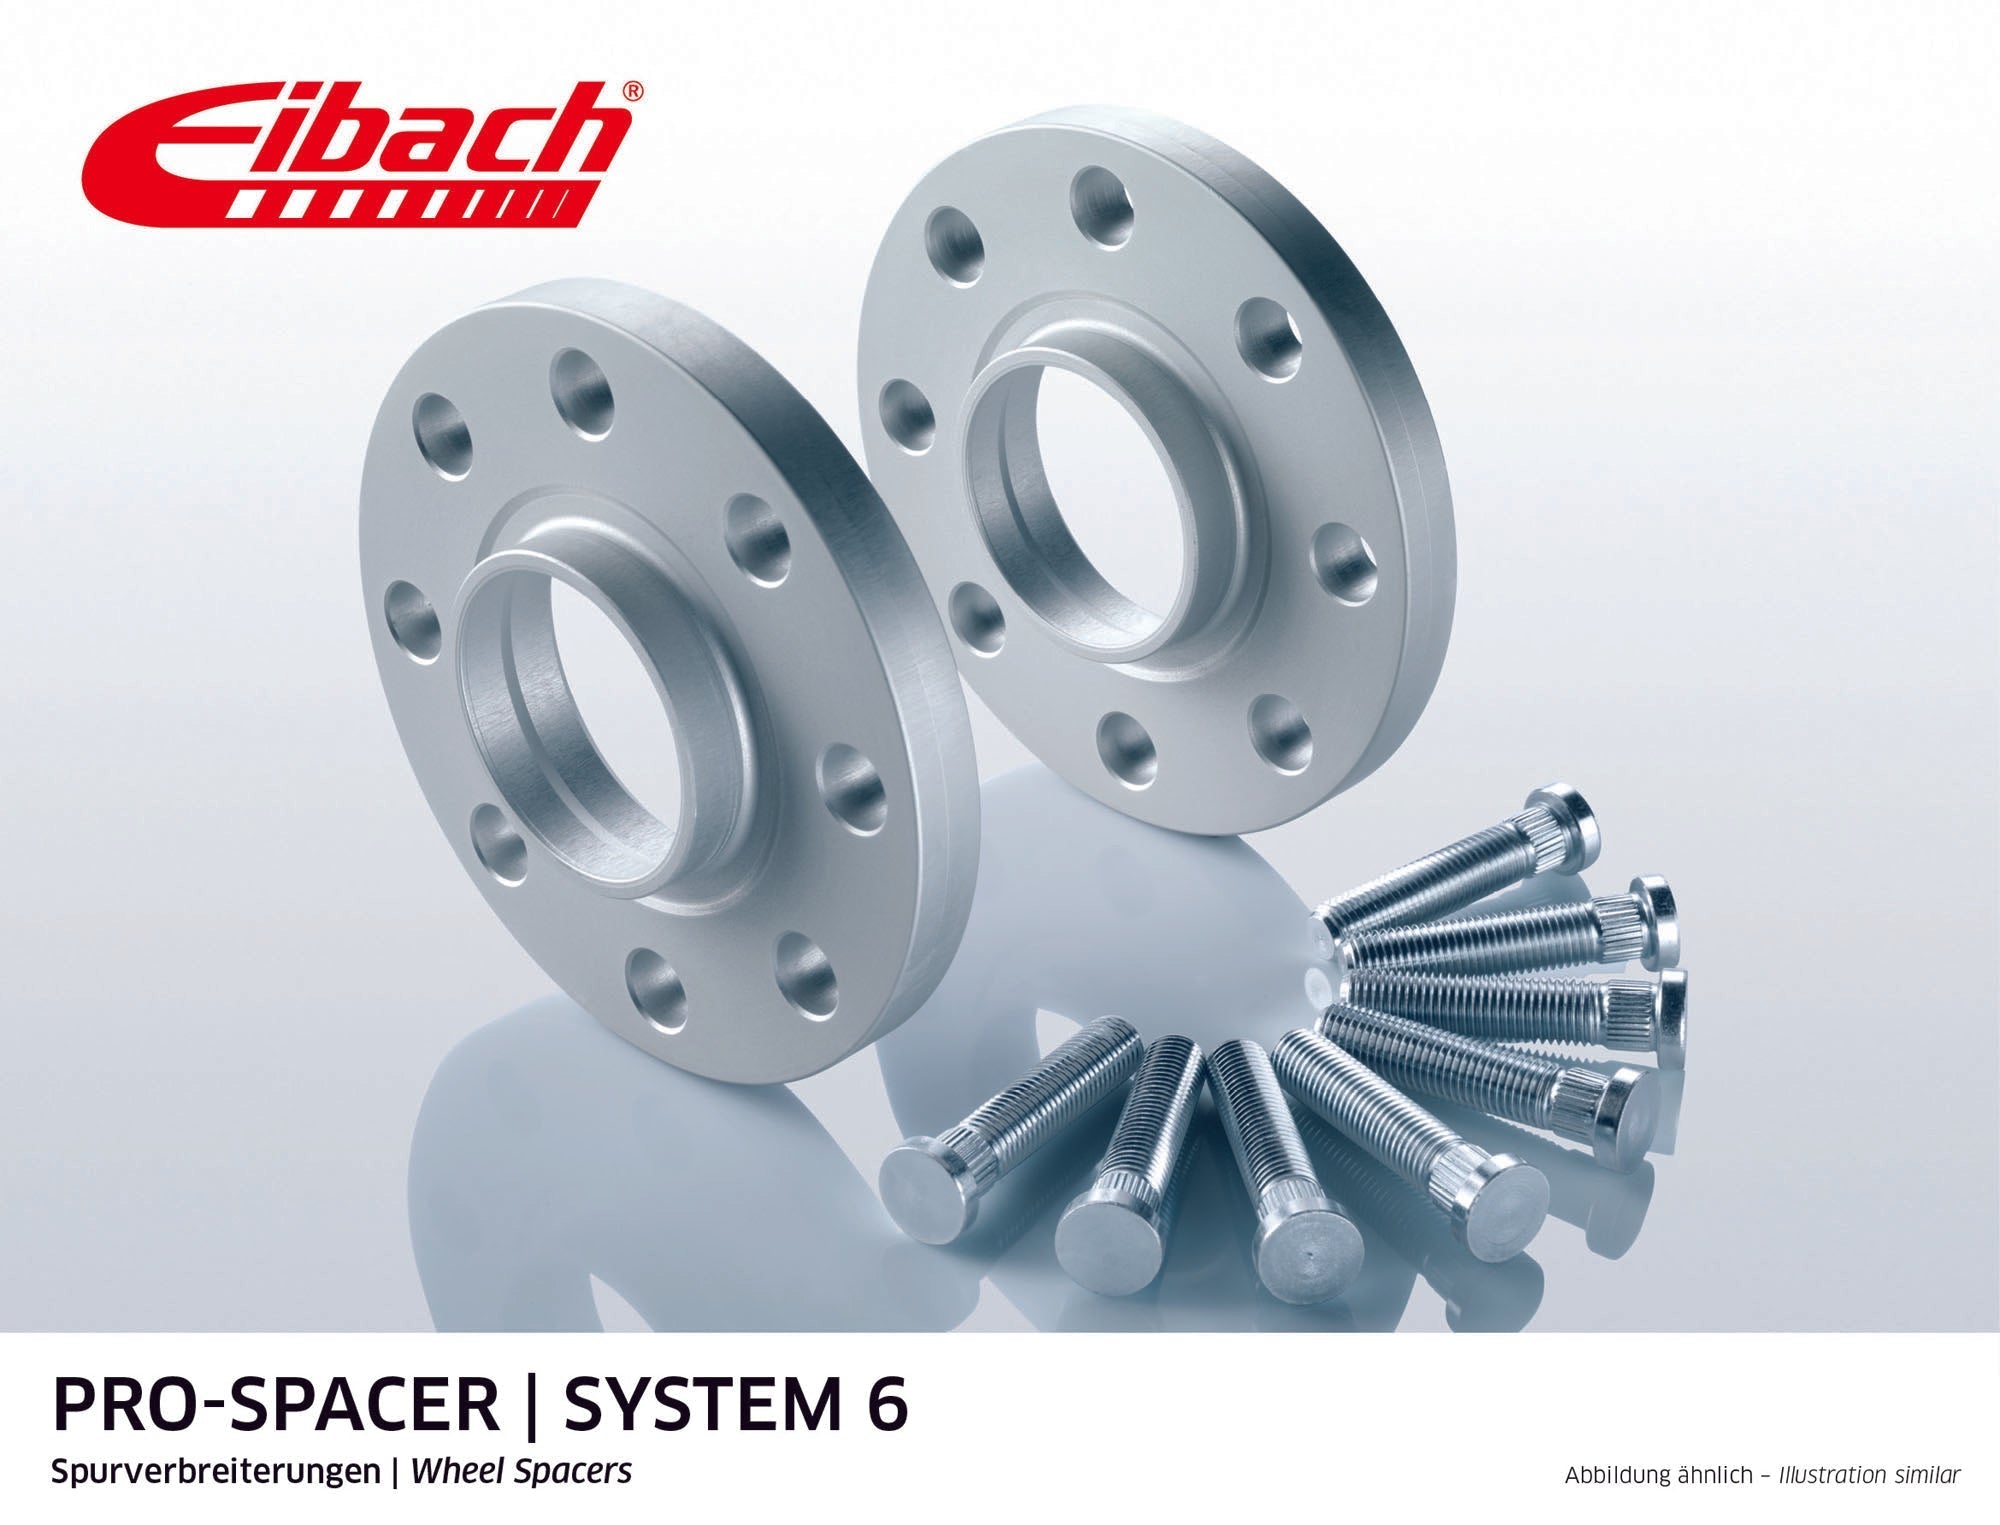 Eibach 18mm Pro-Spacer - Silver Anodized Wheel Spacer 911 1993-97 #S90-6-18-001